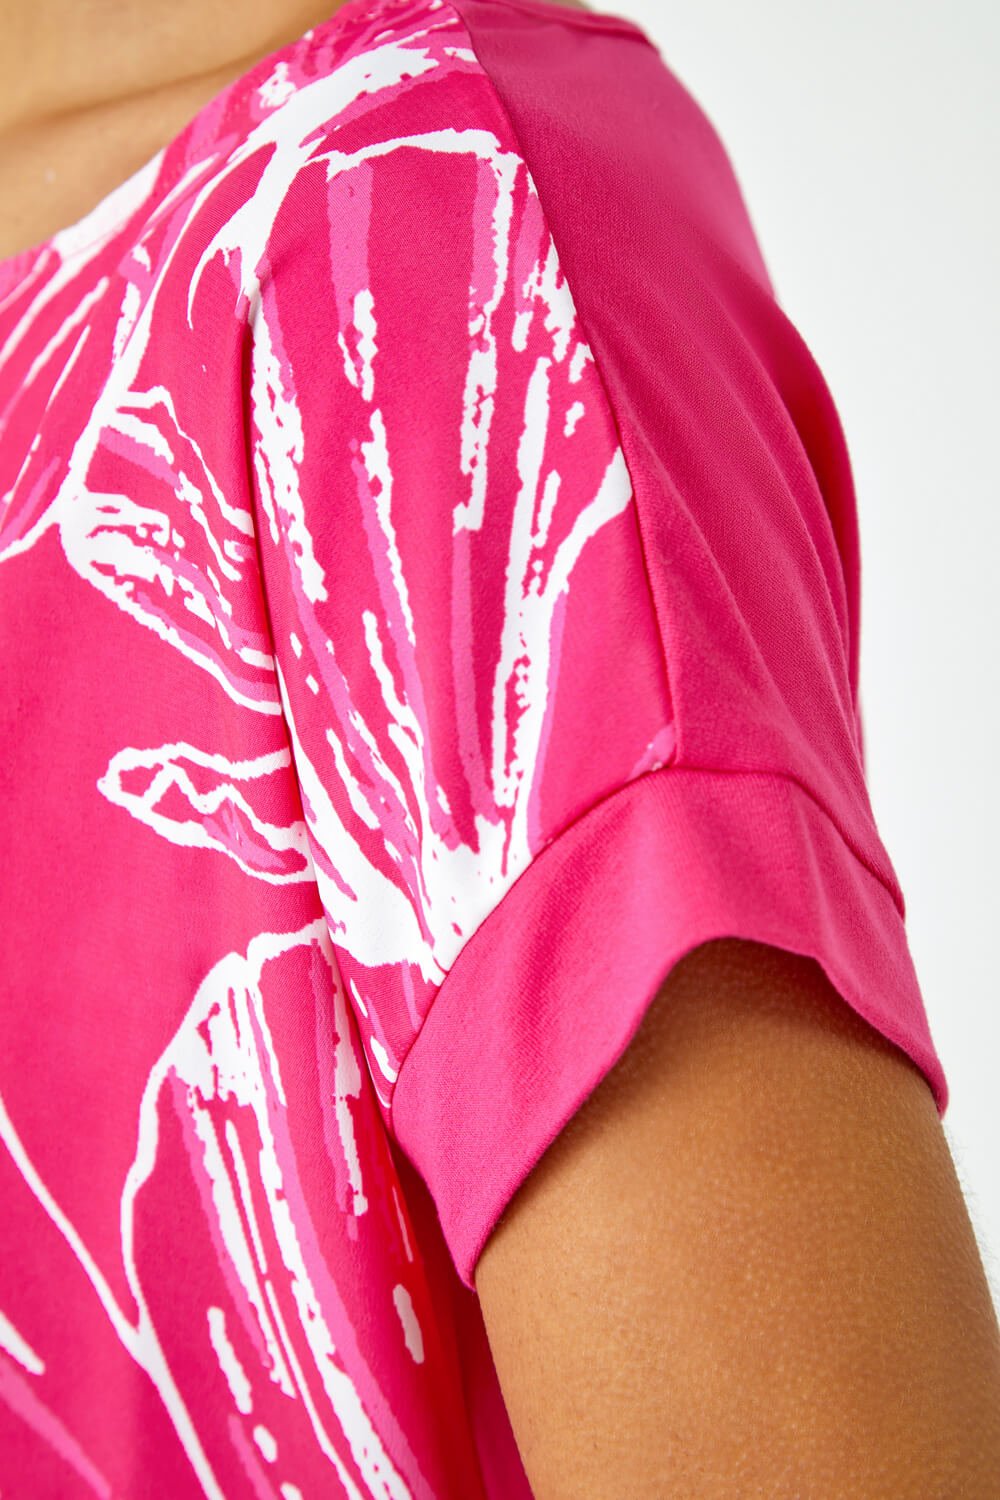 PINK Linear Floral Print Stretch T-Shirt, Image 5 of 5